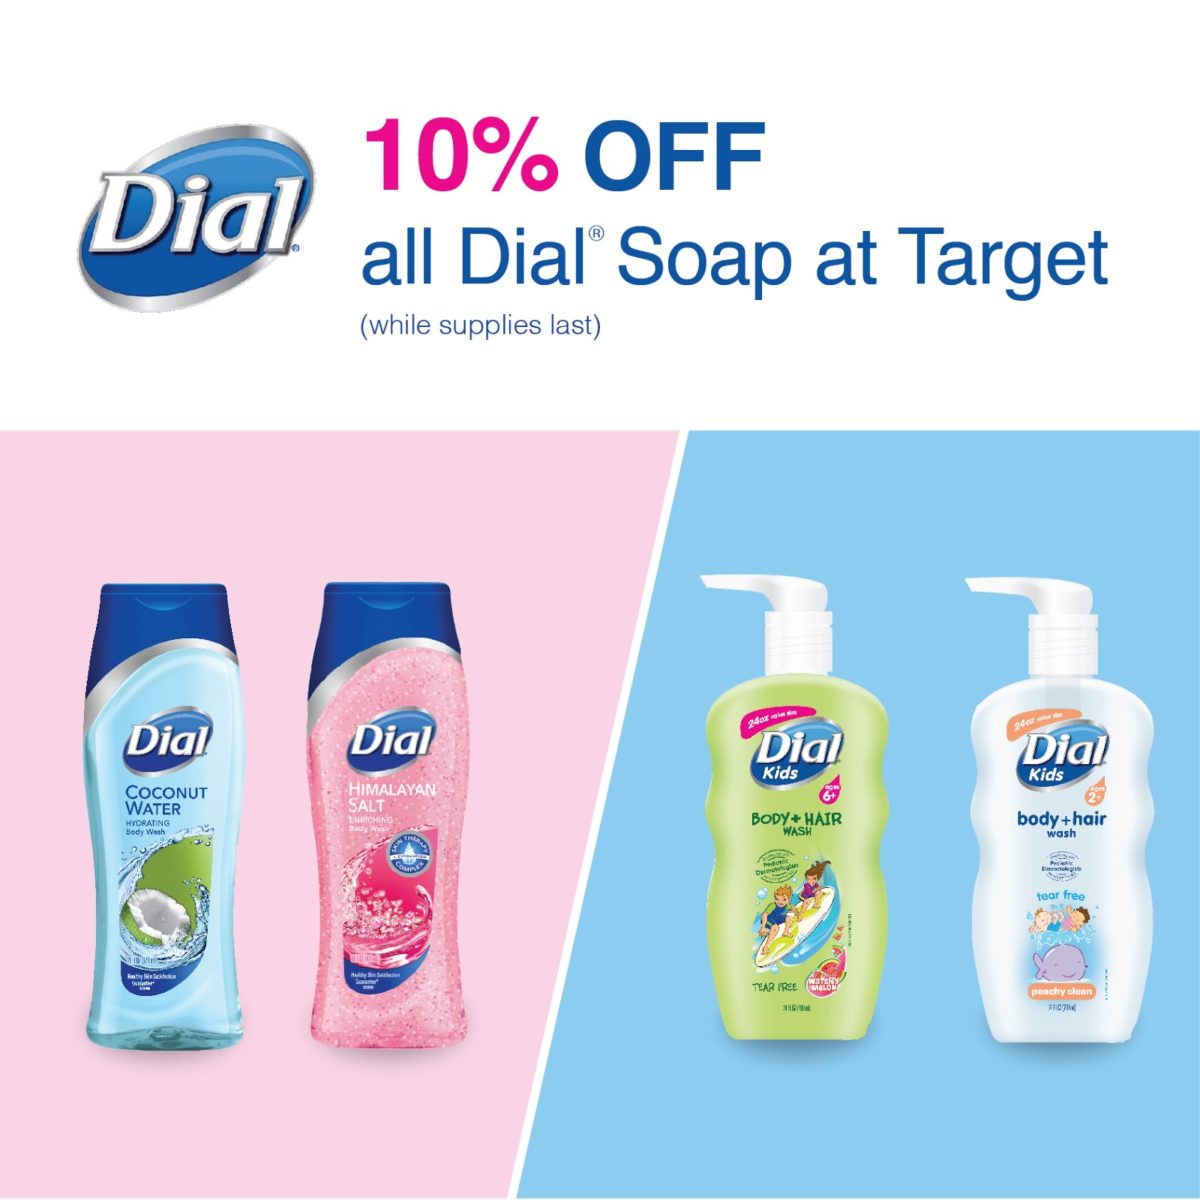 Score 10% Off All Dial Soap At Target!